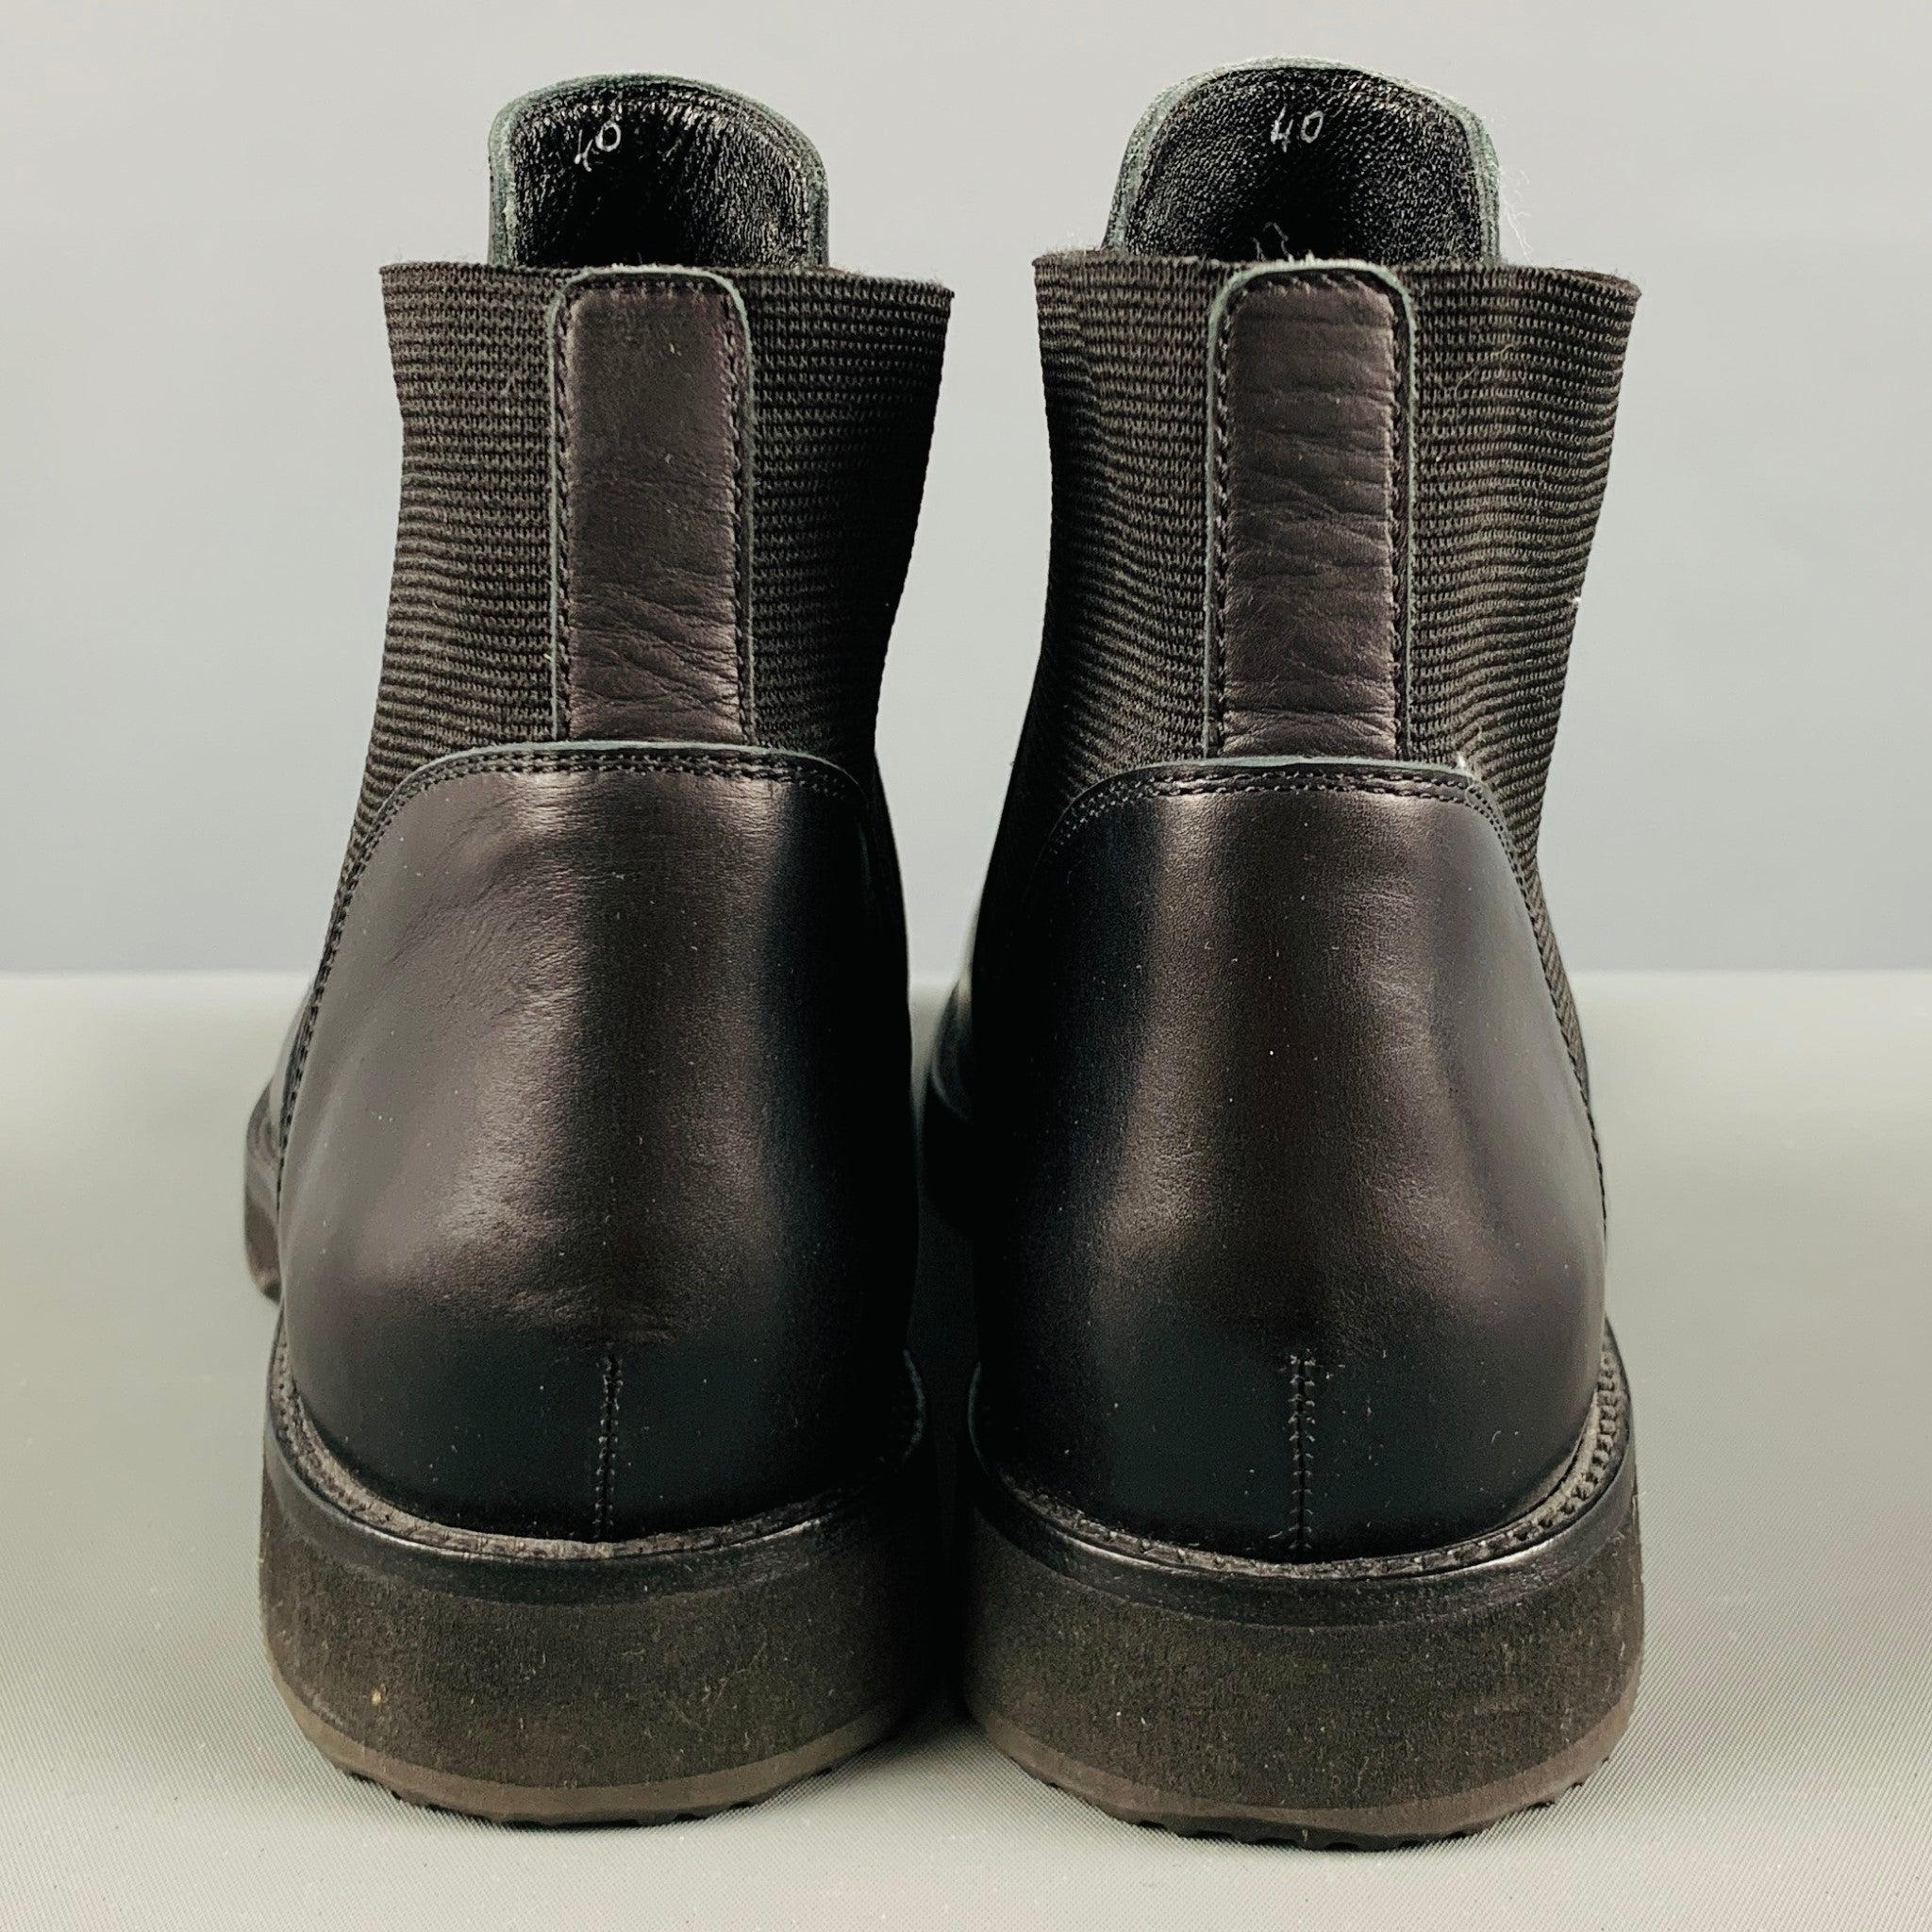 YOHJI YAMAMOTO Size 10 Black Leather Mixed Materials Boots In Good Condition For Sale In San Francisco, CA